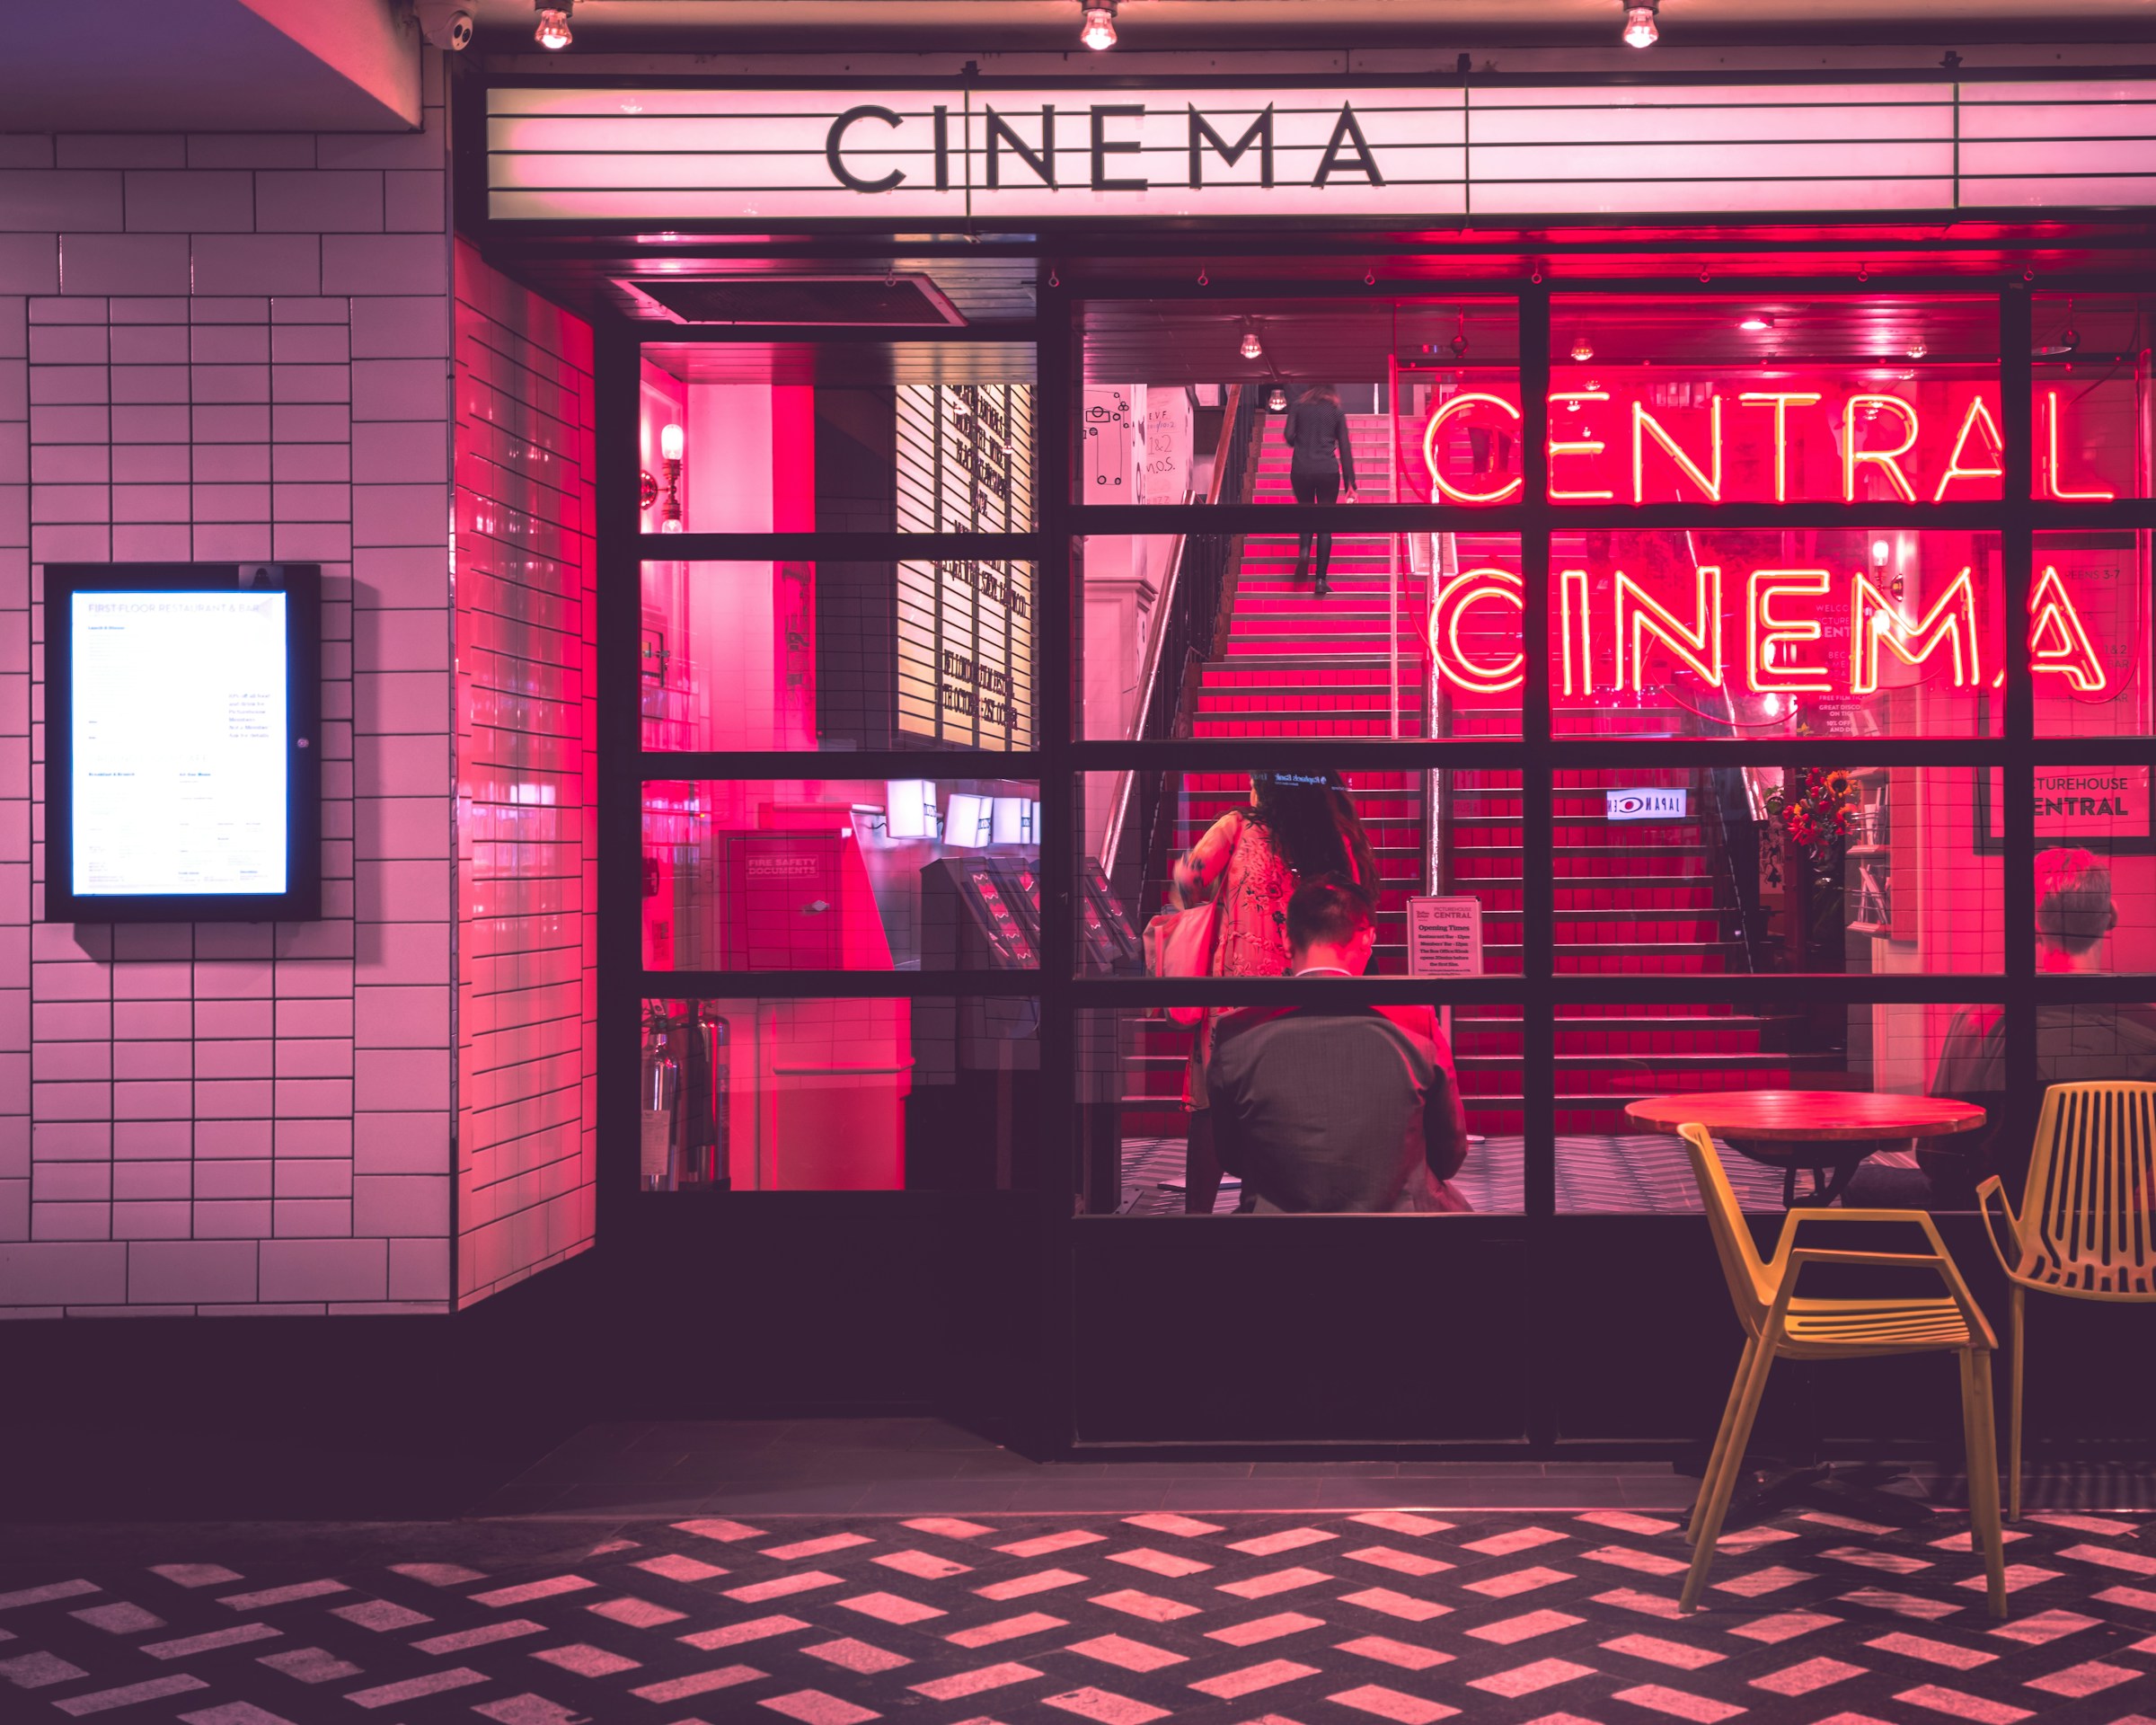 Top 40 Entertainment Center, Cineplex, and Theme Park Engineering Firms for 2023 Photo by Myke Simon on Unsplash